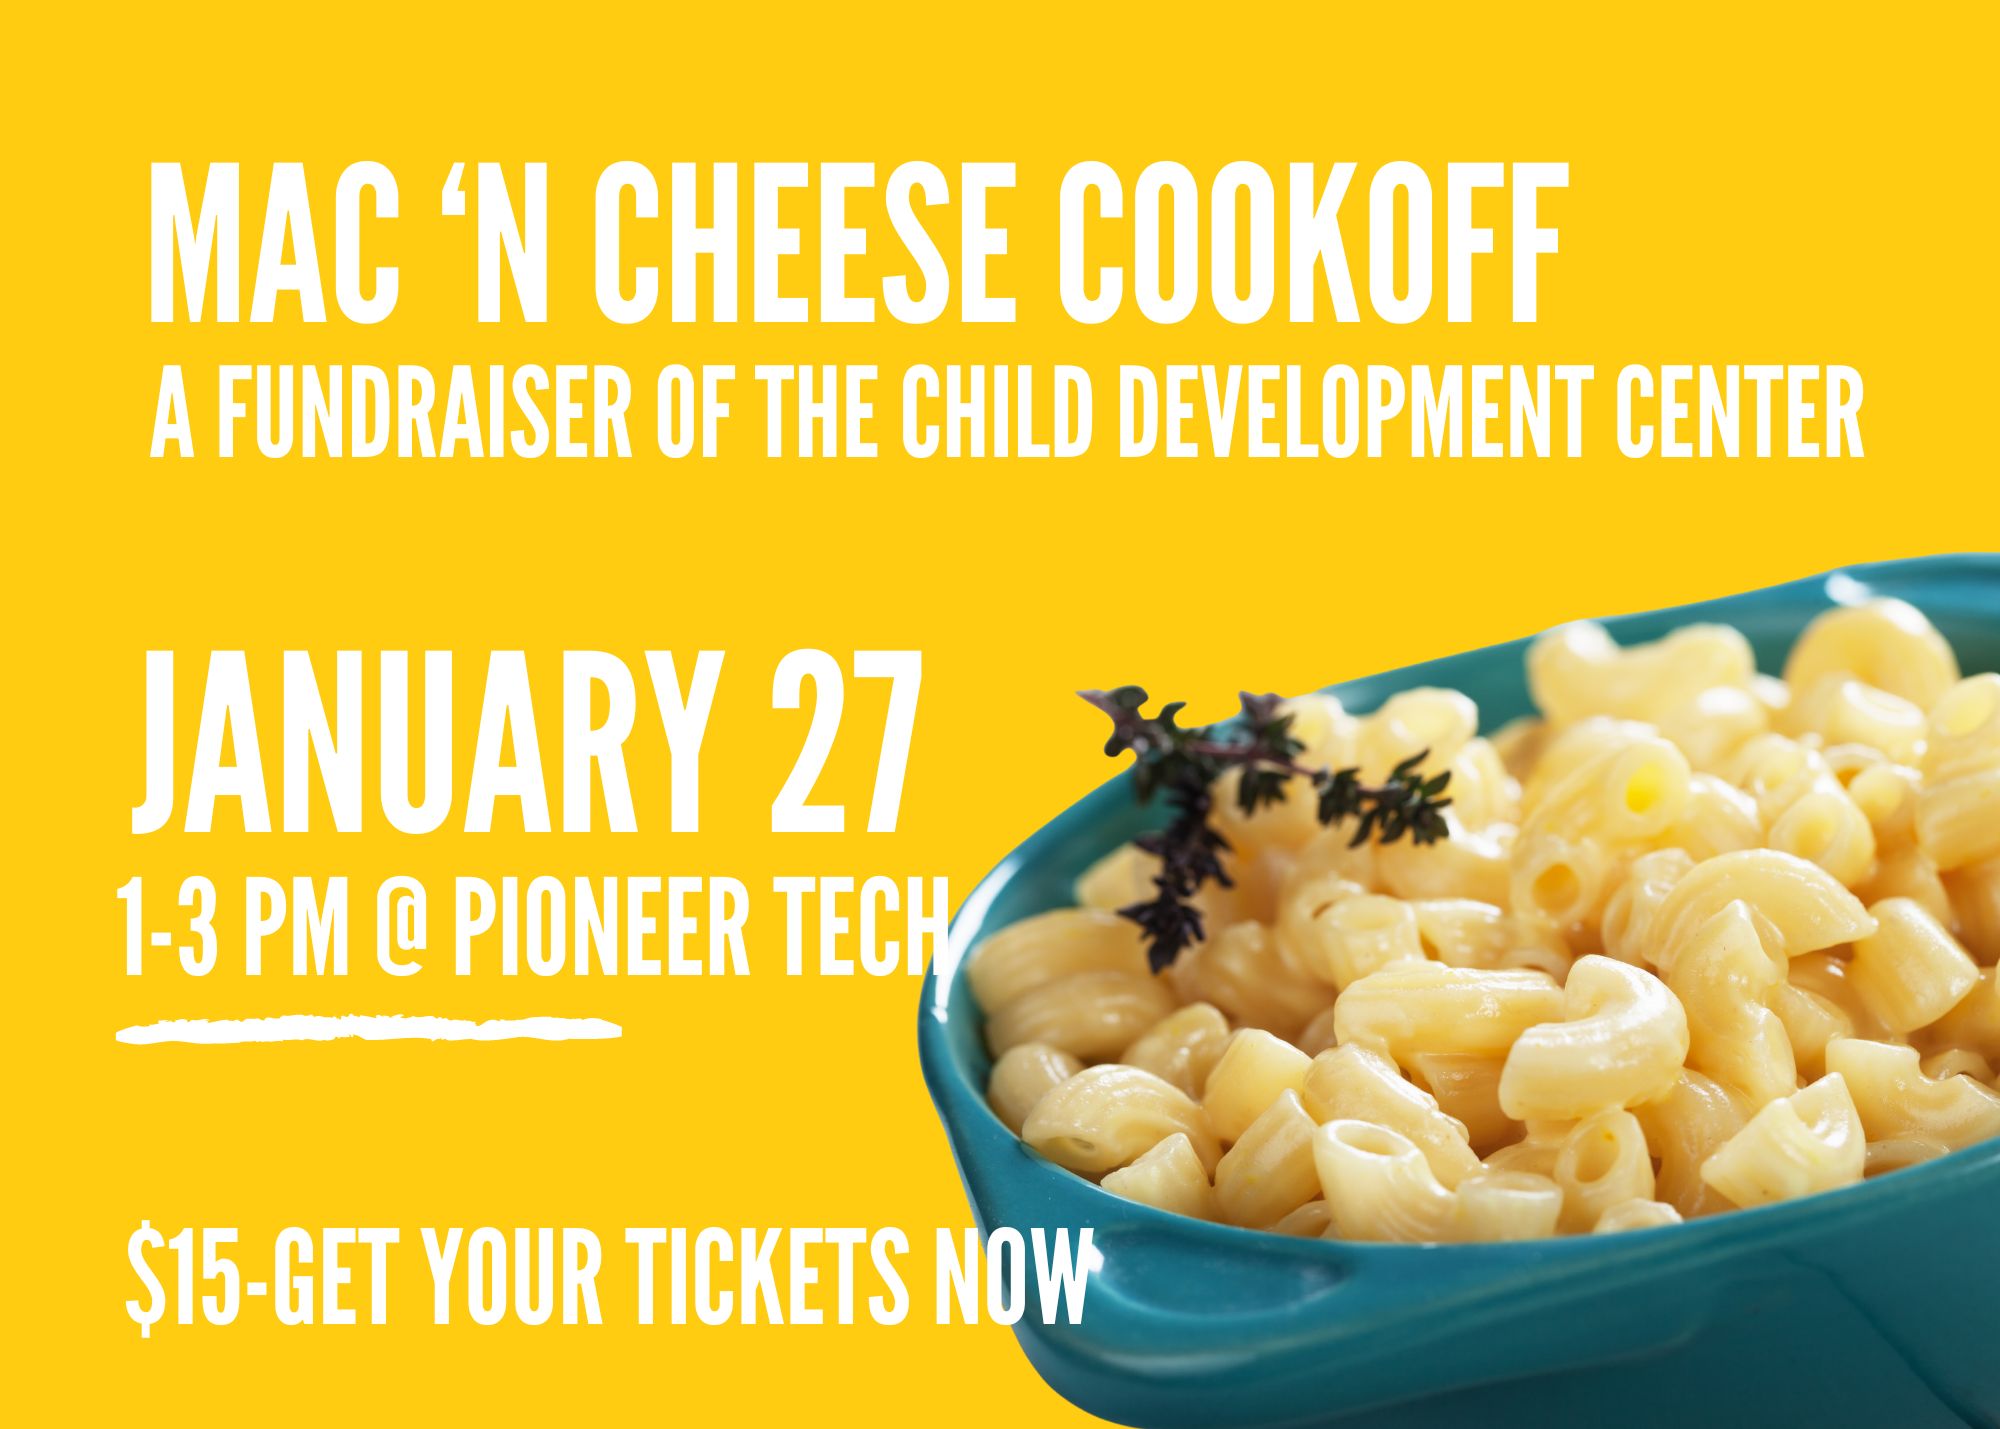 Mac & Cheese Cook-Off January 27